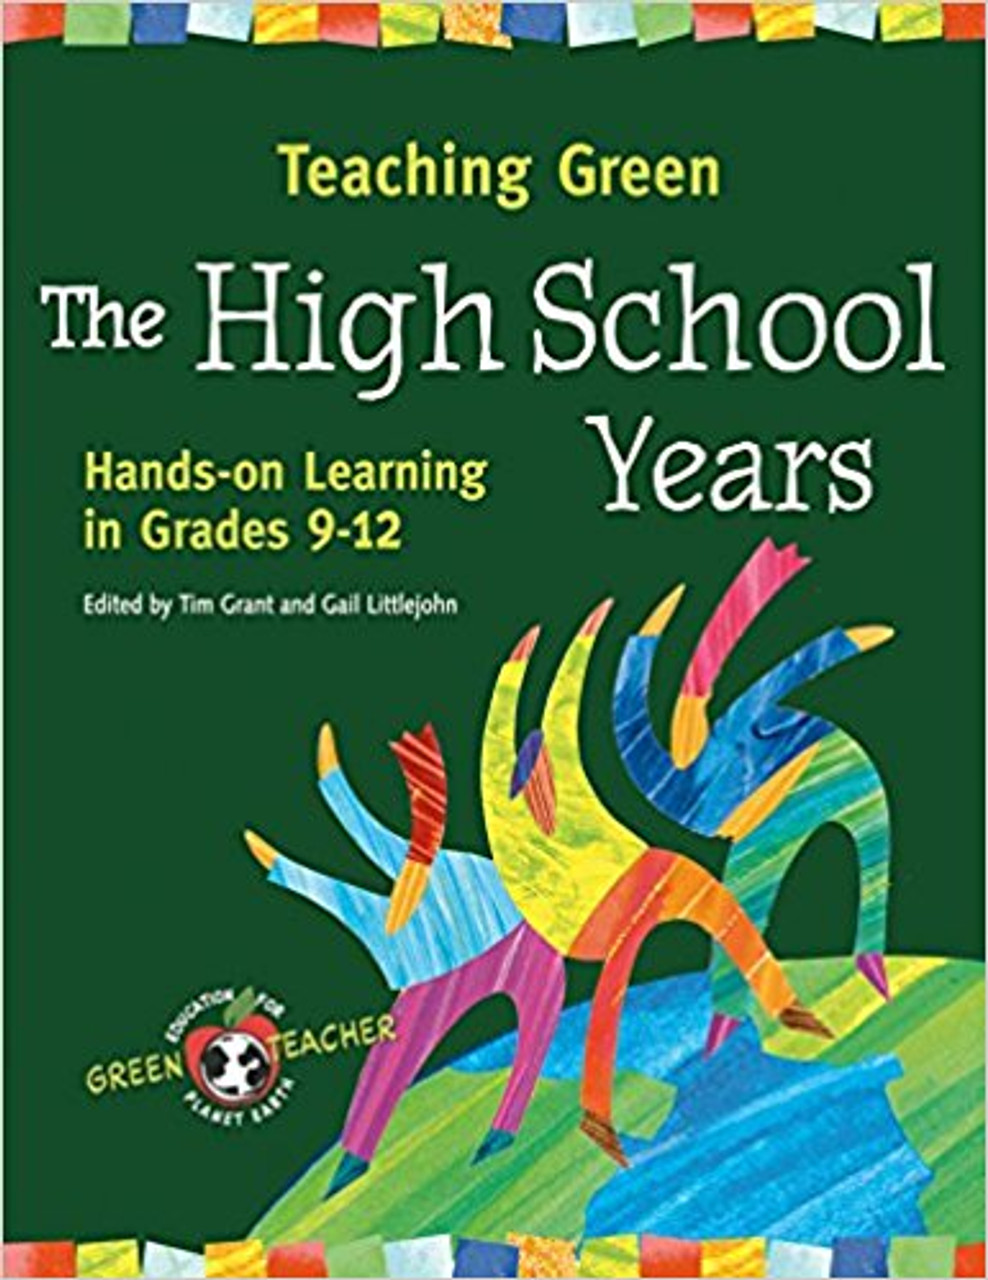 The High School Years: Hands-On Learning in Grades 9-12 by Tim Grant